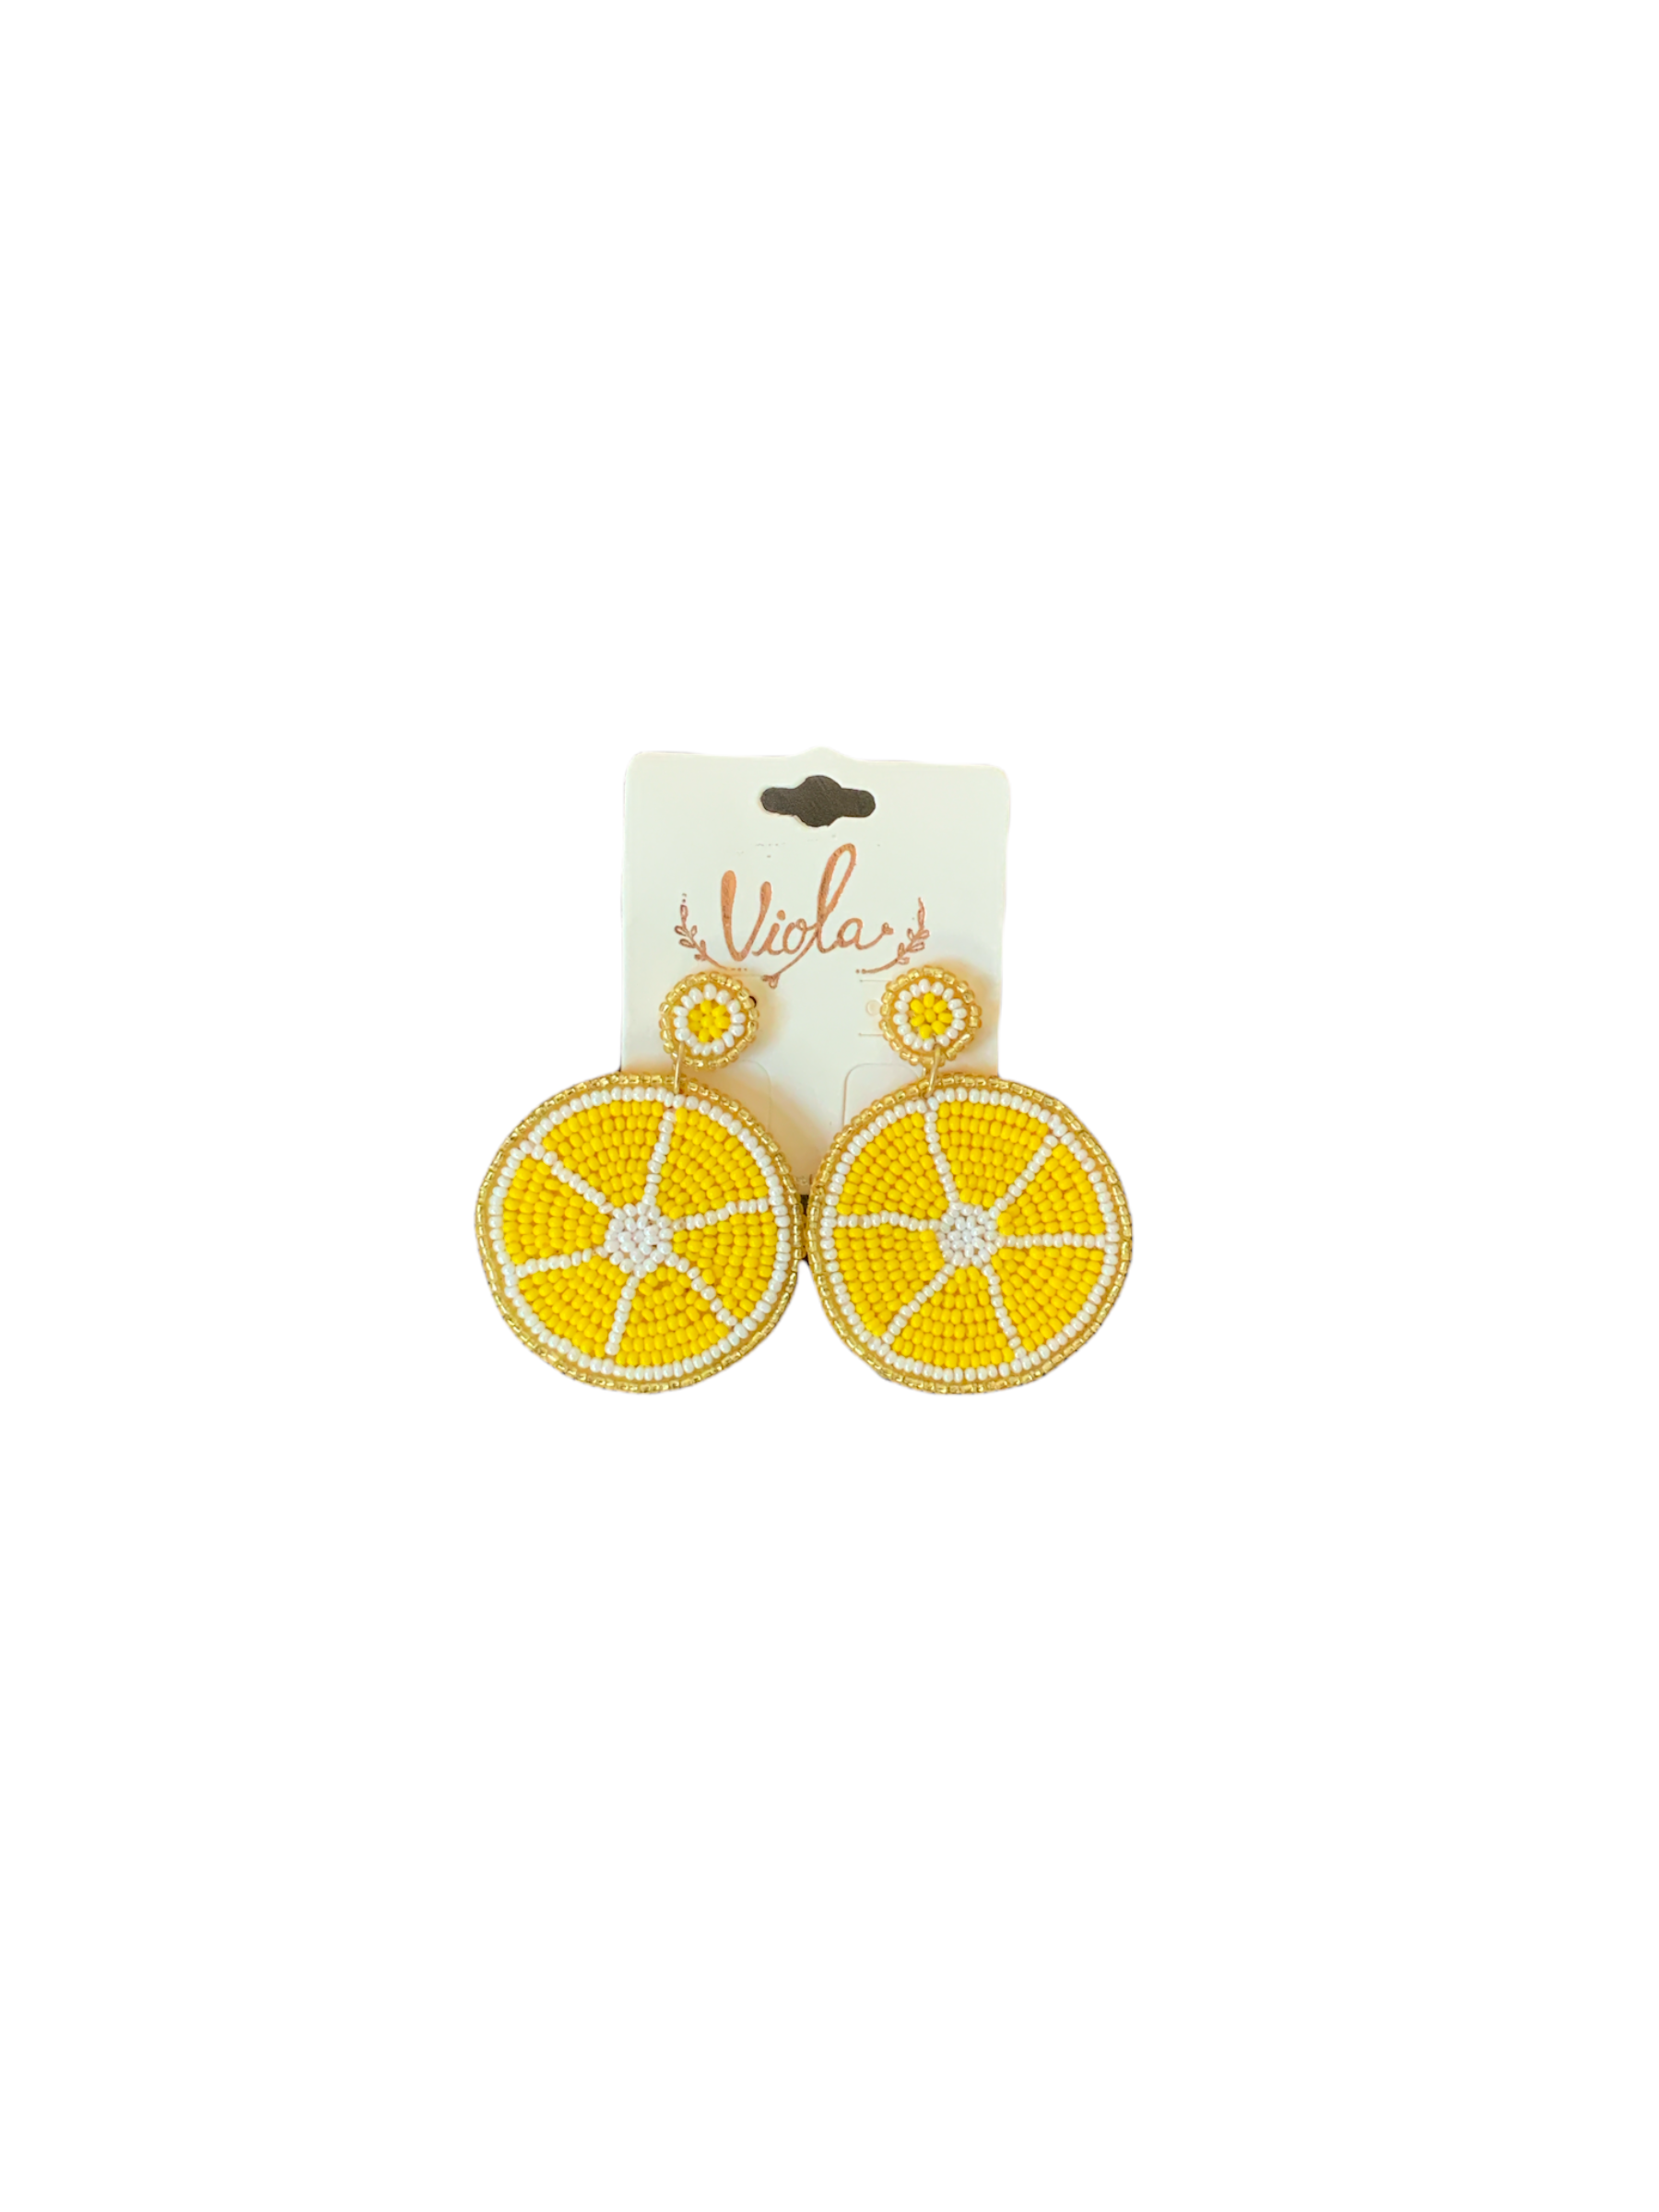 YELLOW EARRINGS - Baby Bums Clothing 